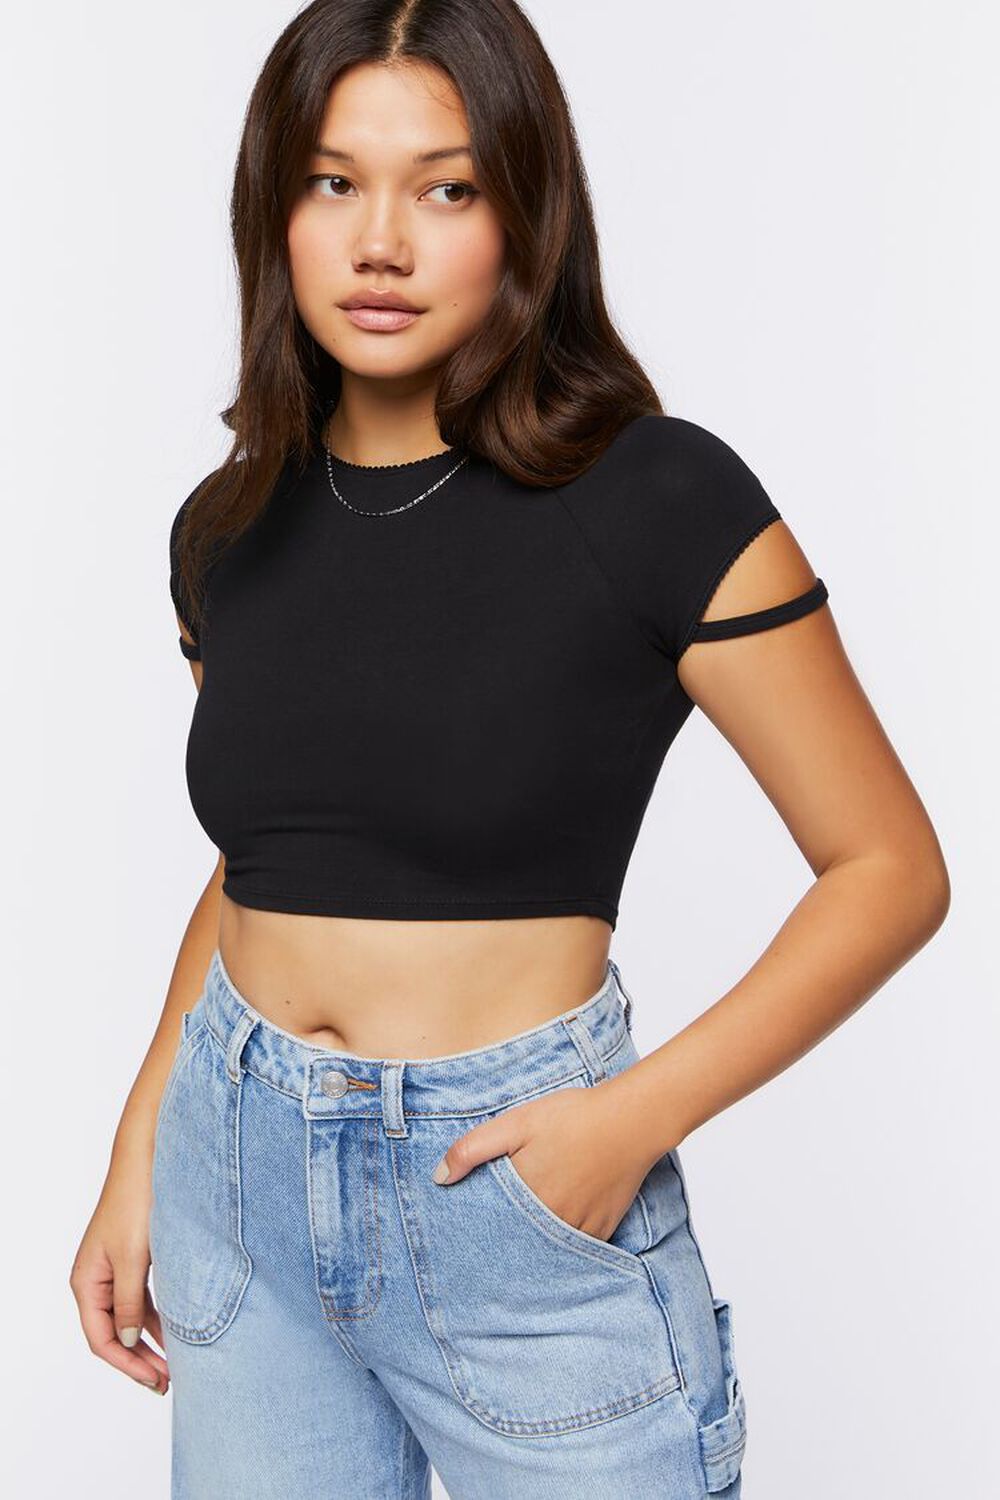 BLACK Strappy Cropped Tee, image 1